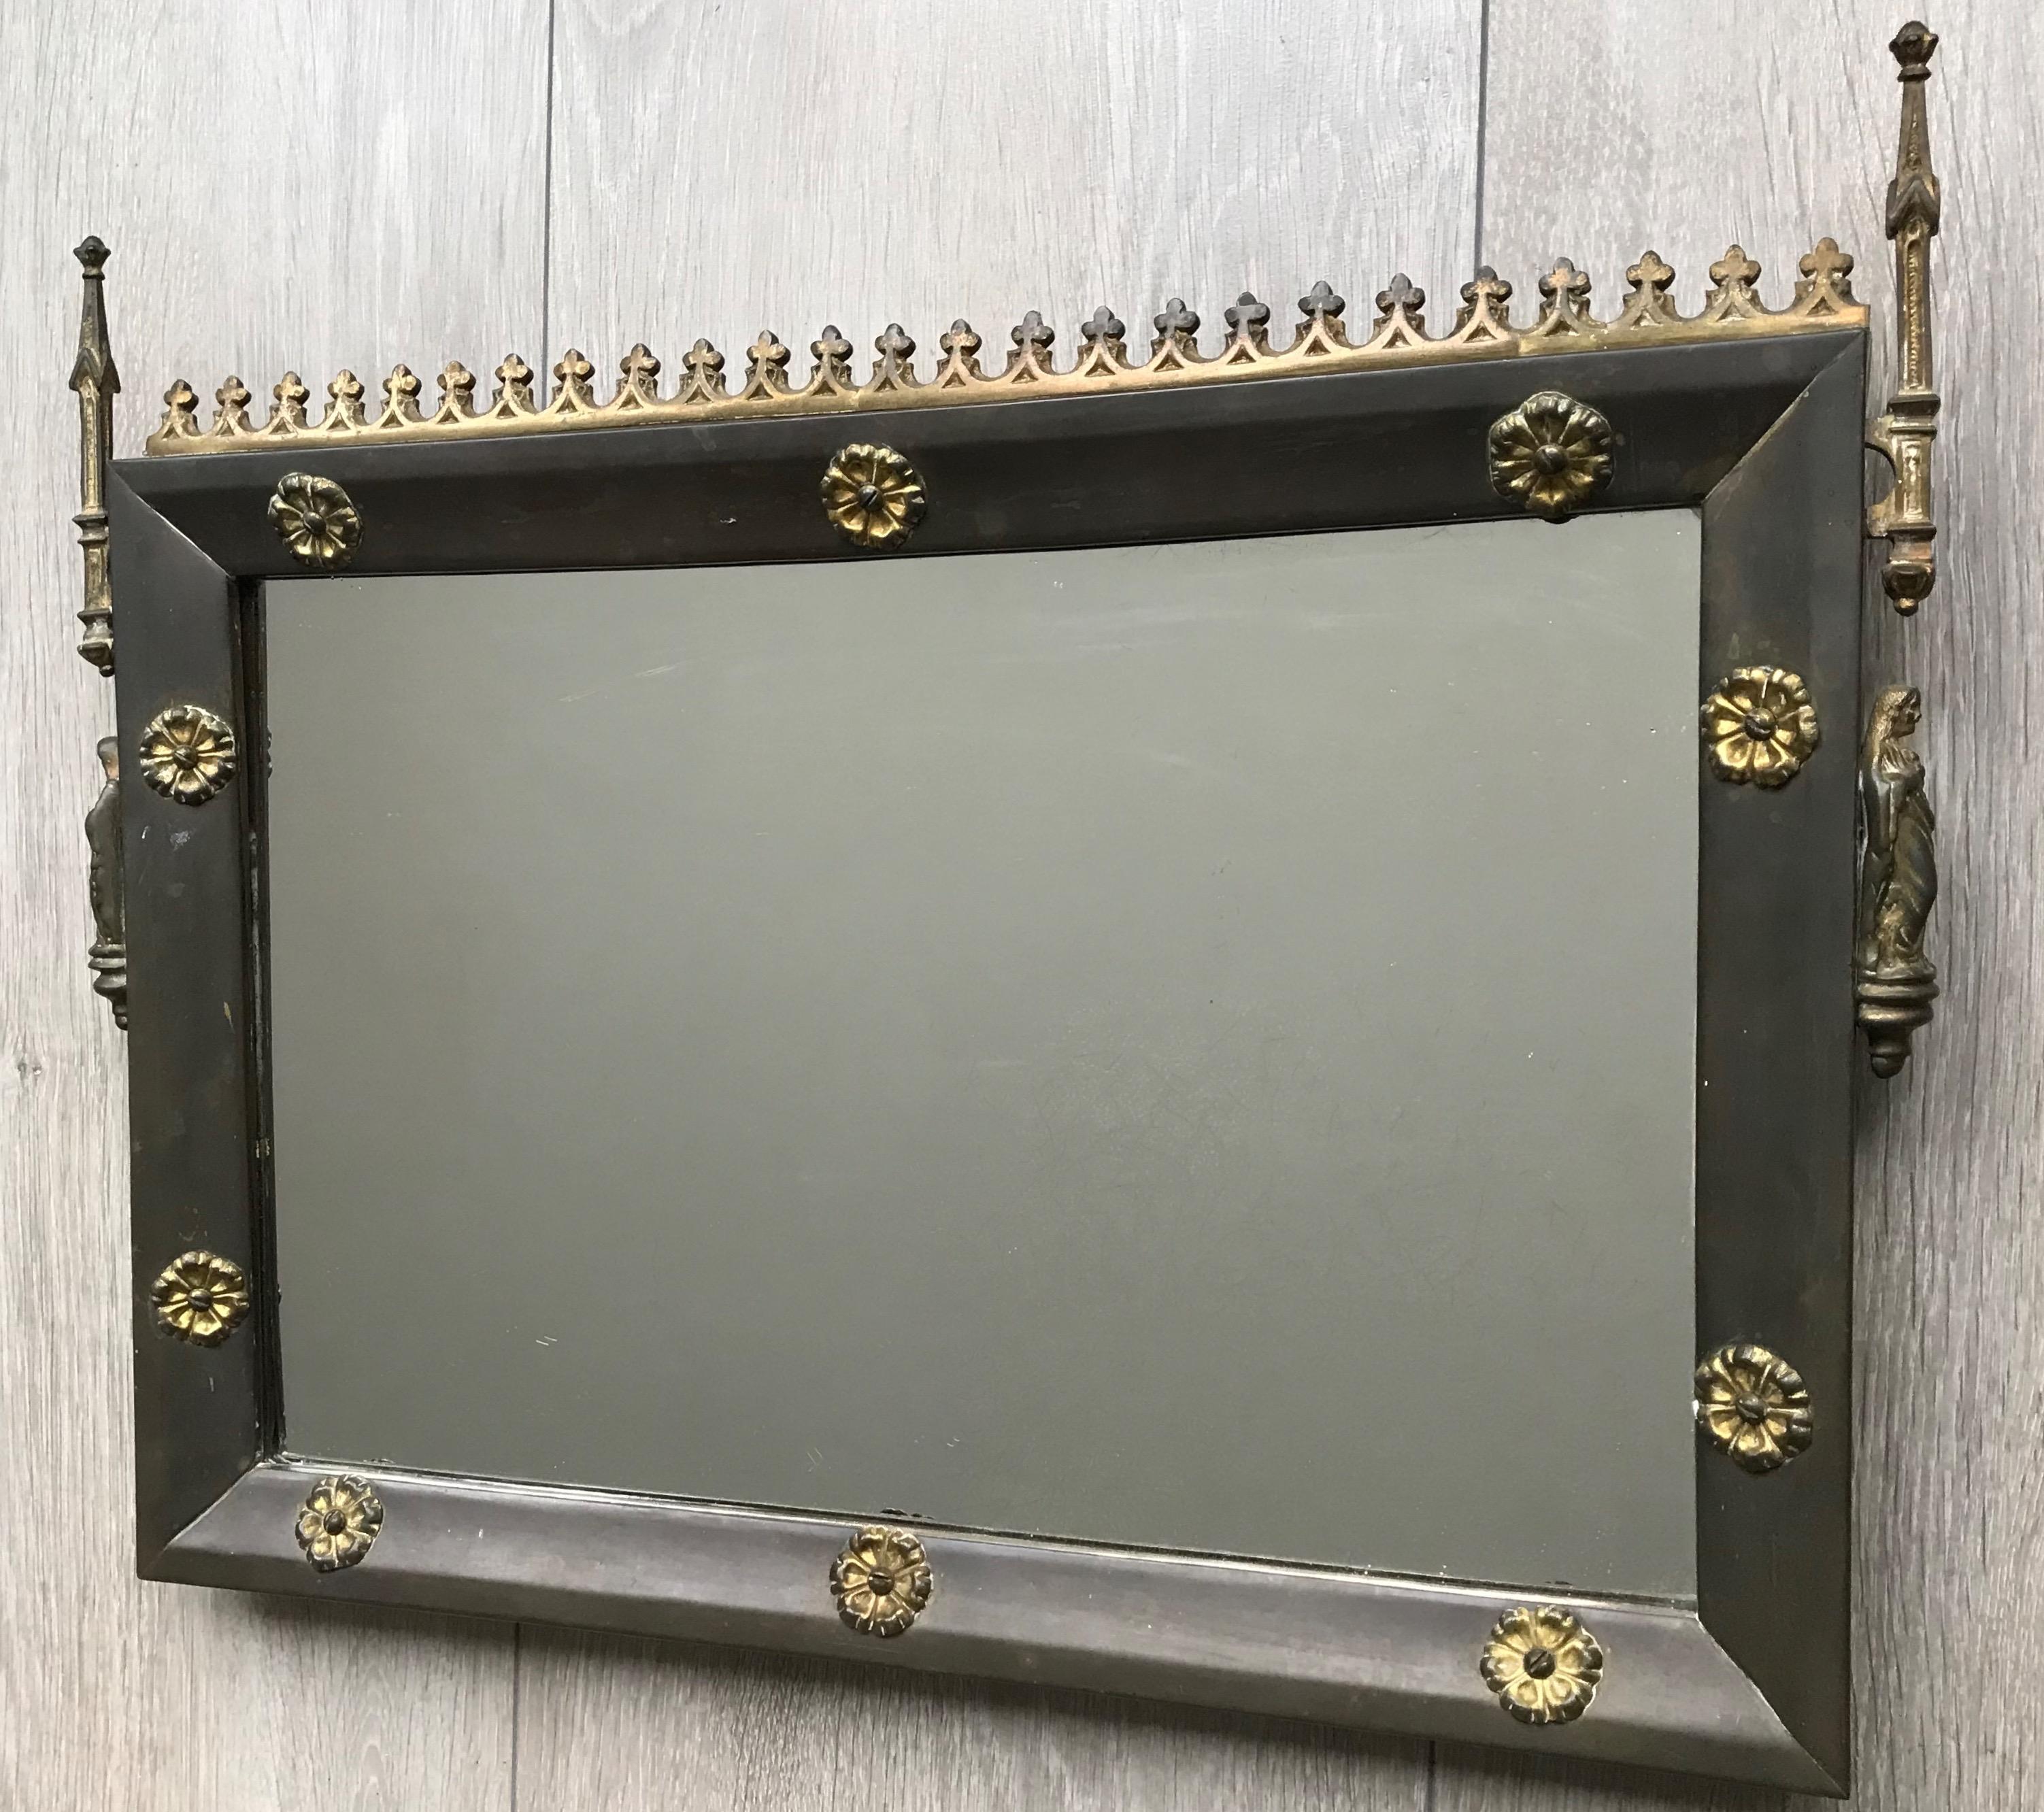 Antique Brass & Gilt Bronze Gothic Revival Wall Mirror with Holy Mary Sculptures 7